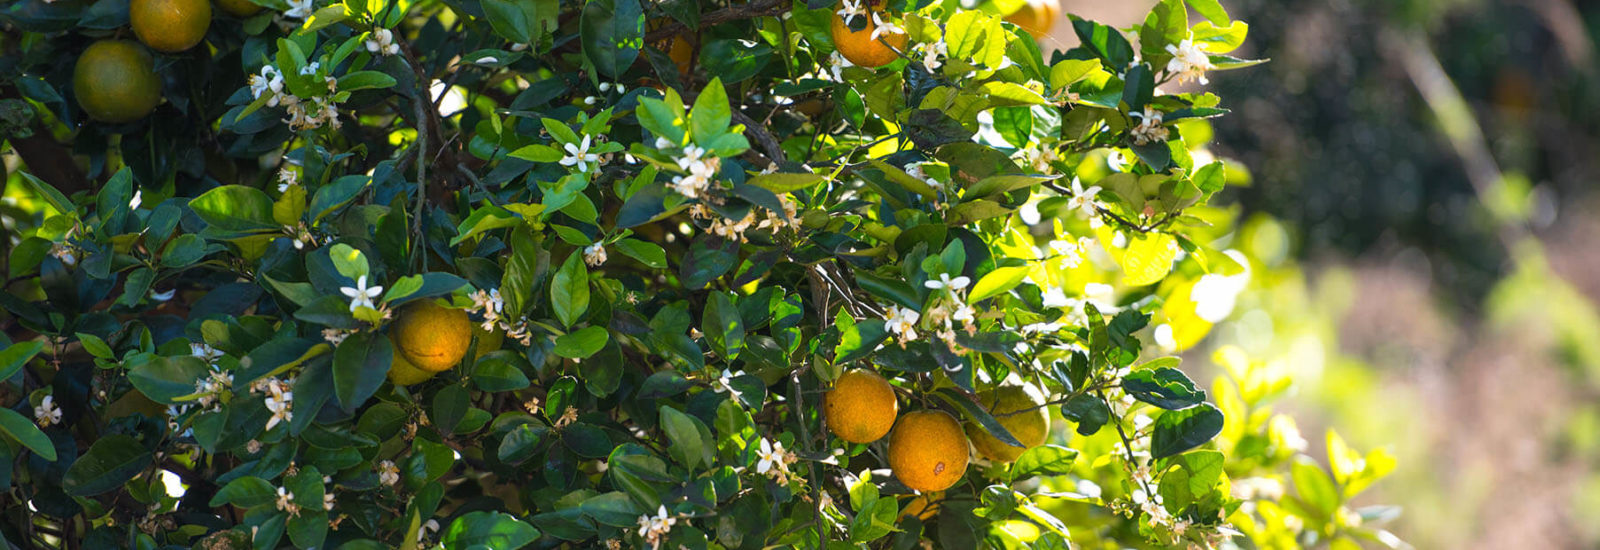 Protected: Comprehensive Final Reports on CRDF-Funded Citrus Research Projects